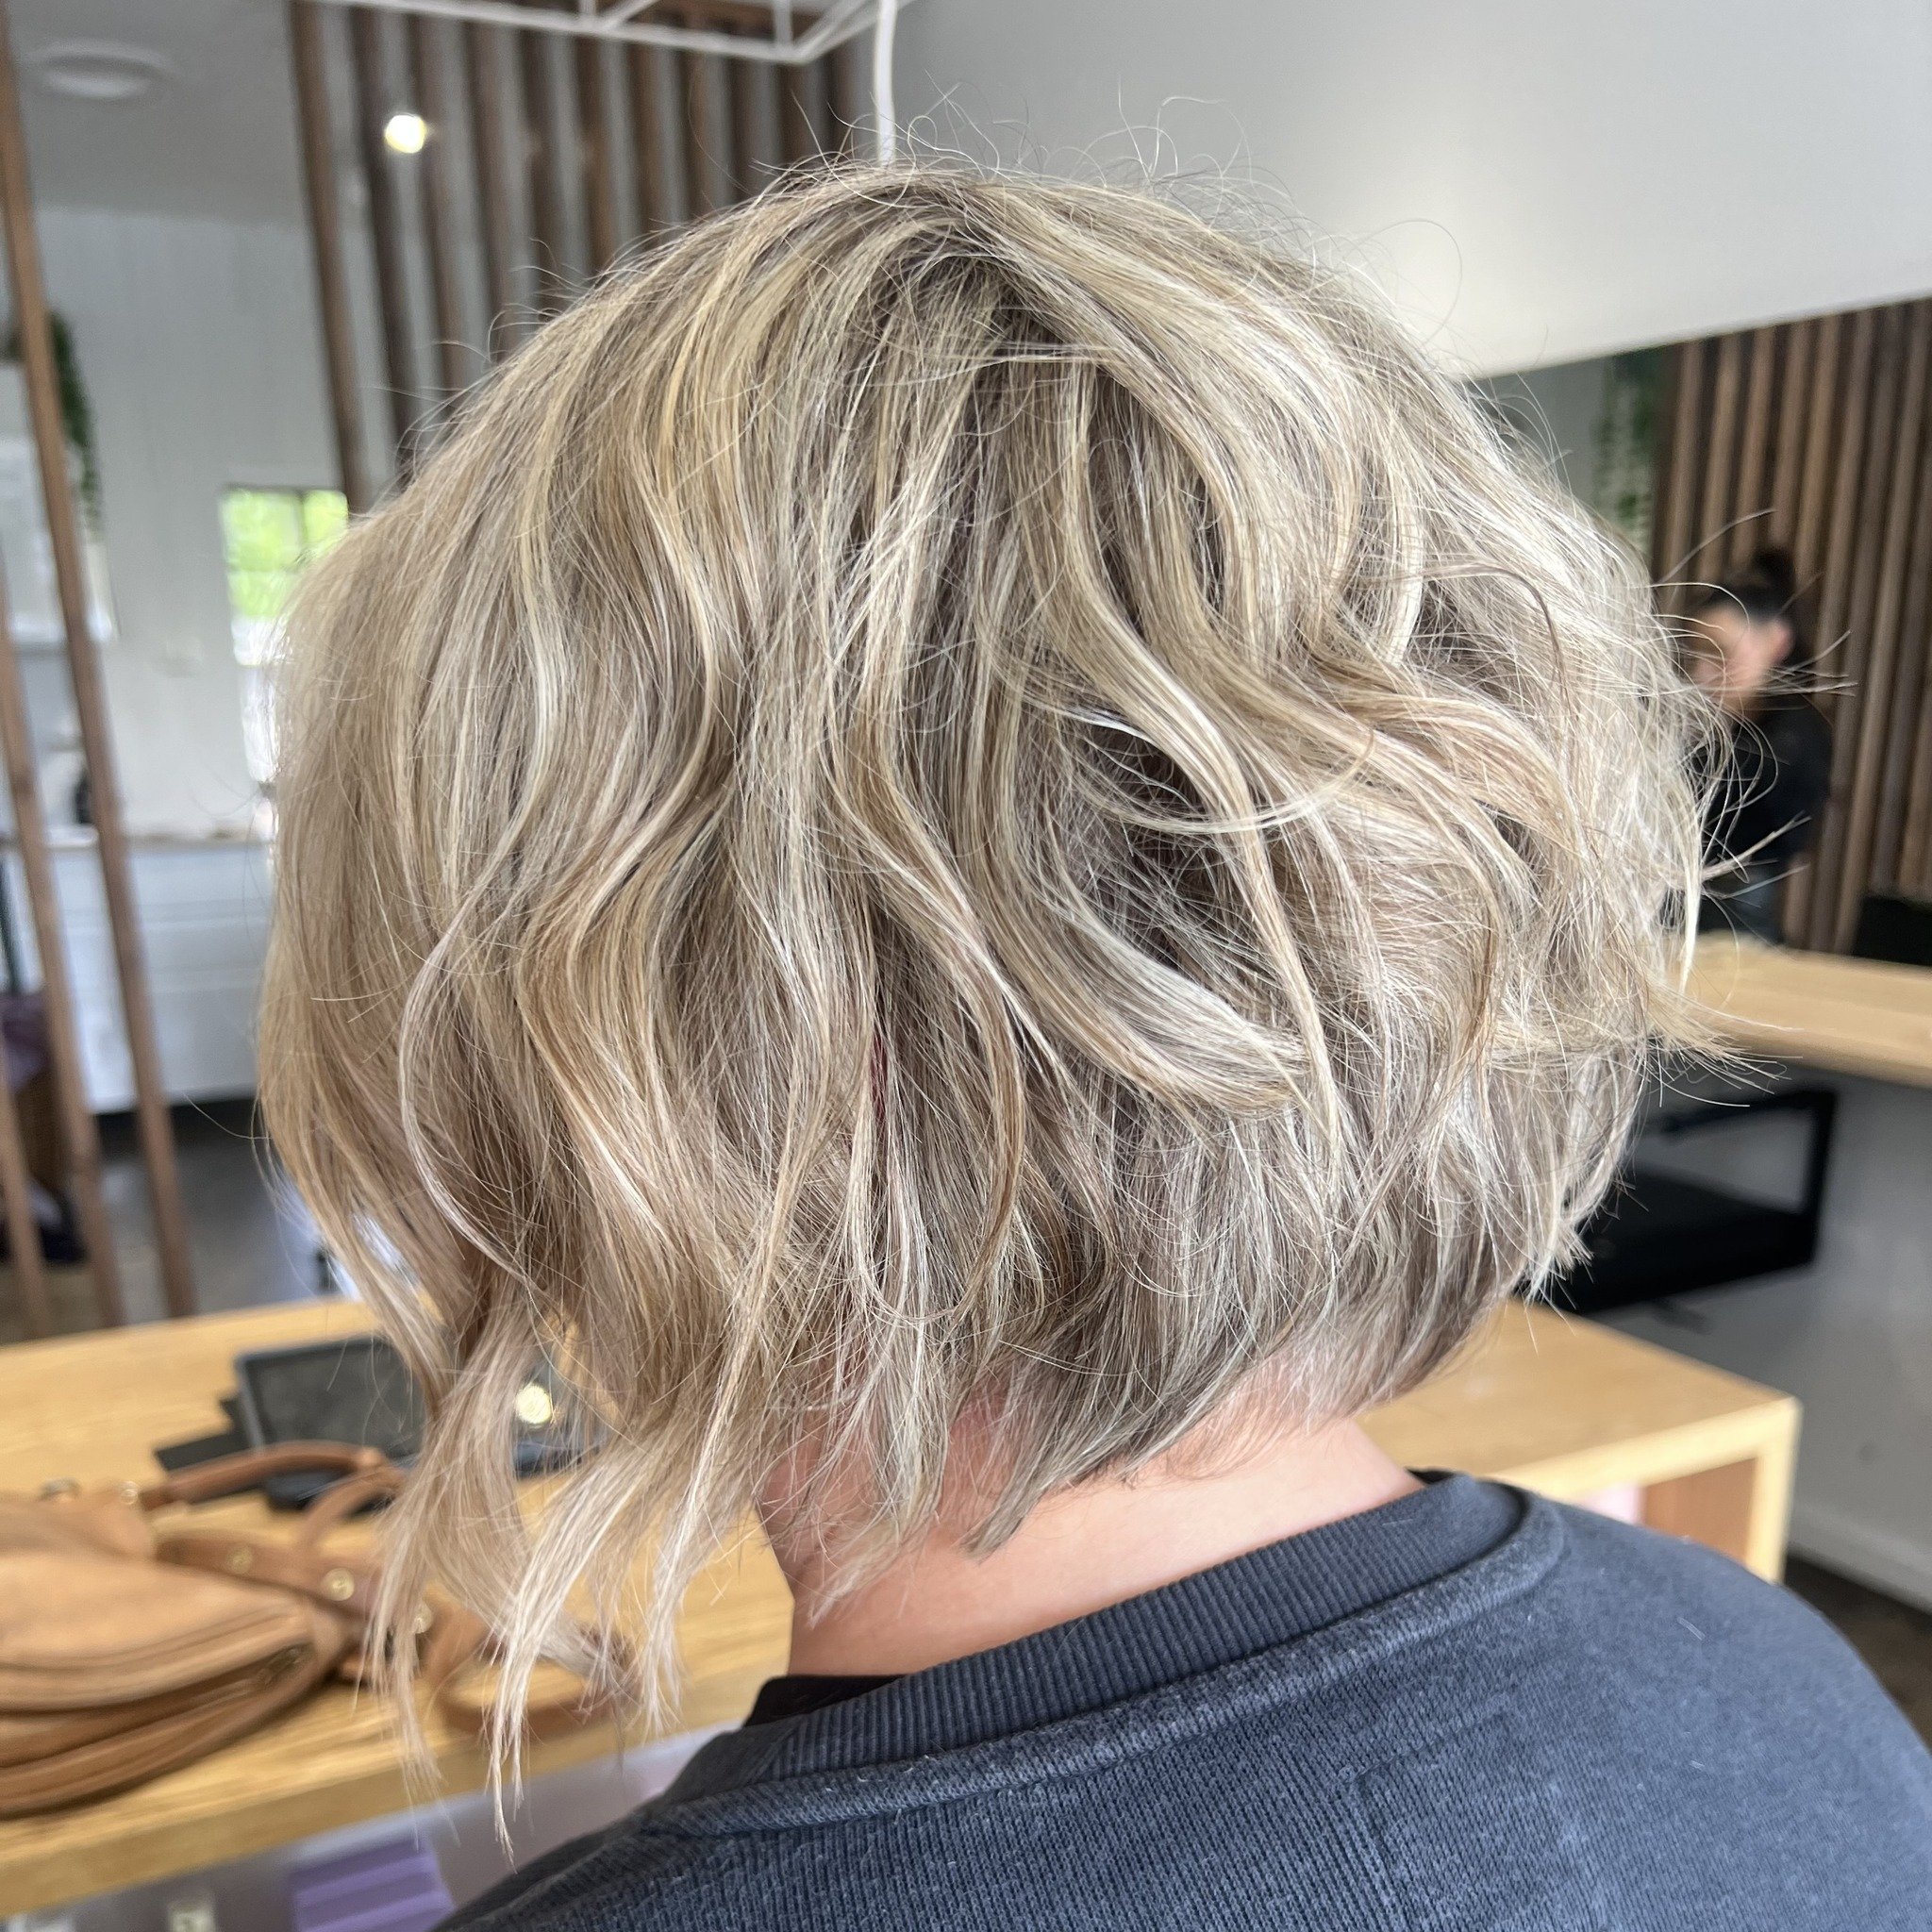 Short and wavy. Loving this style. Need a fresh cut? Book in at the link in our bio. 
&middot;
&middot;
&middot;
 #hairdressing #melbournesalon #melbournehair  #emeraldvic #haircolour #k18 #hairapprentice #hairsalon #haircut #hairstylists #shorthair